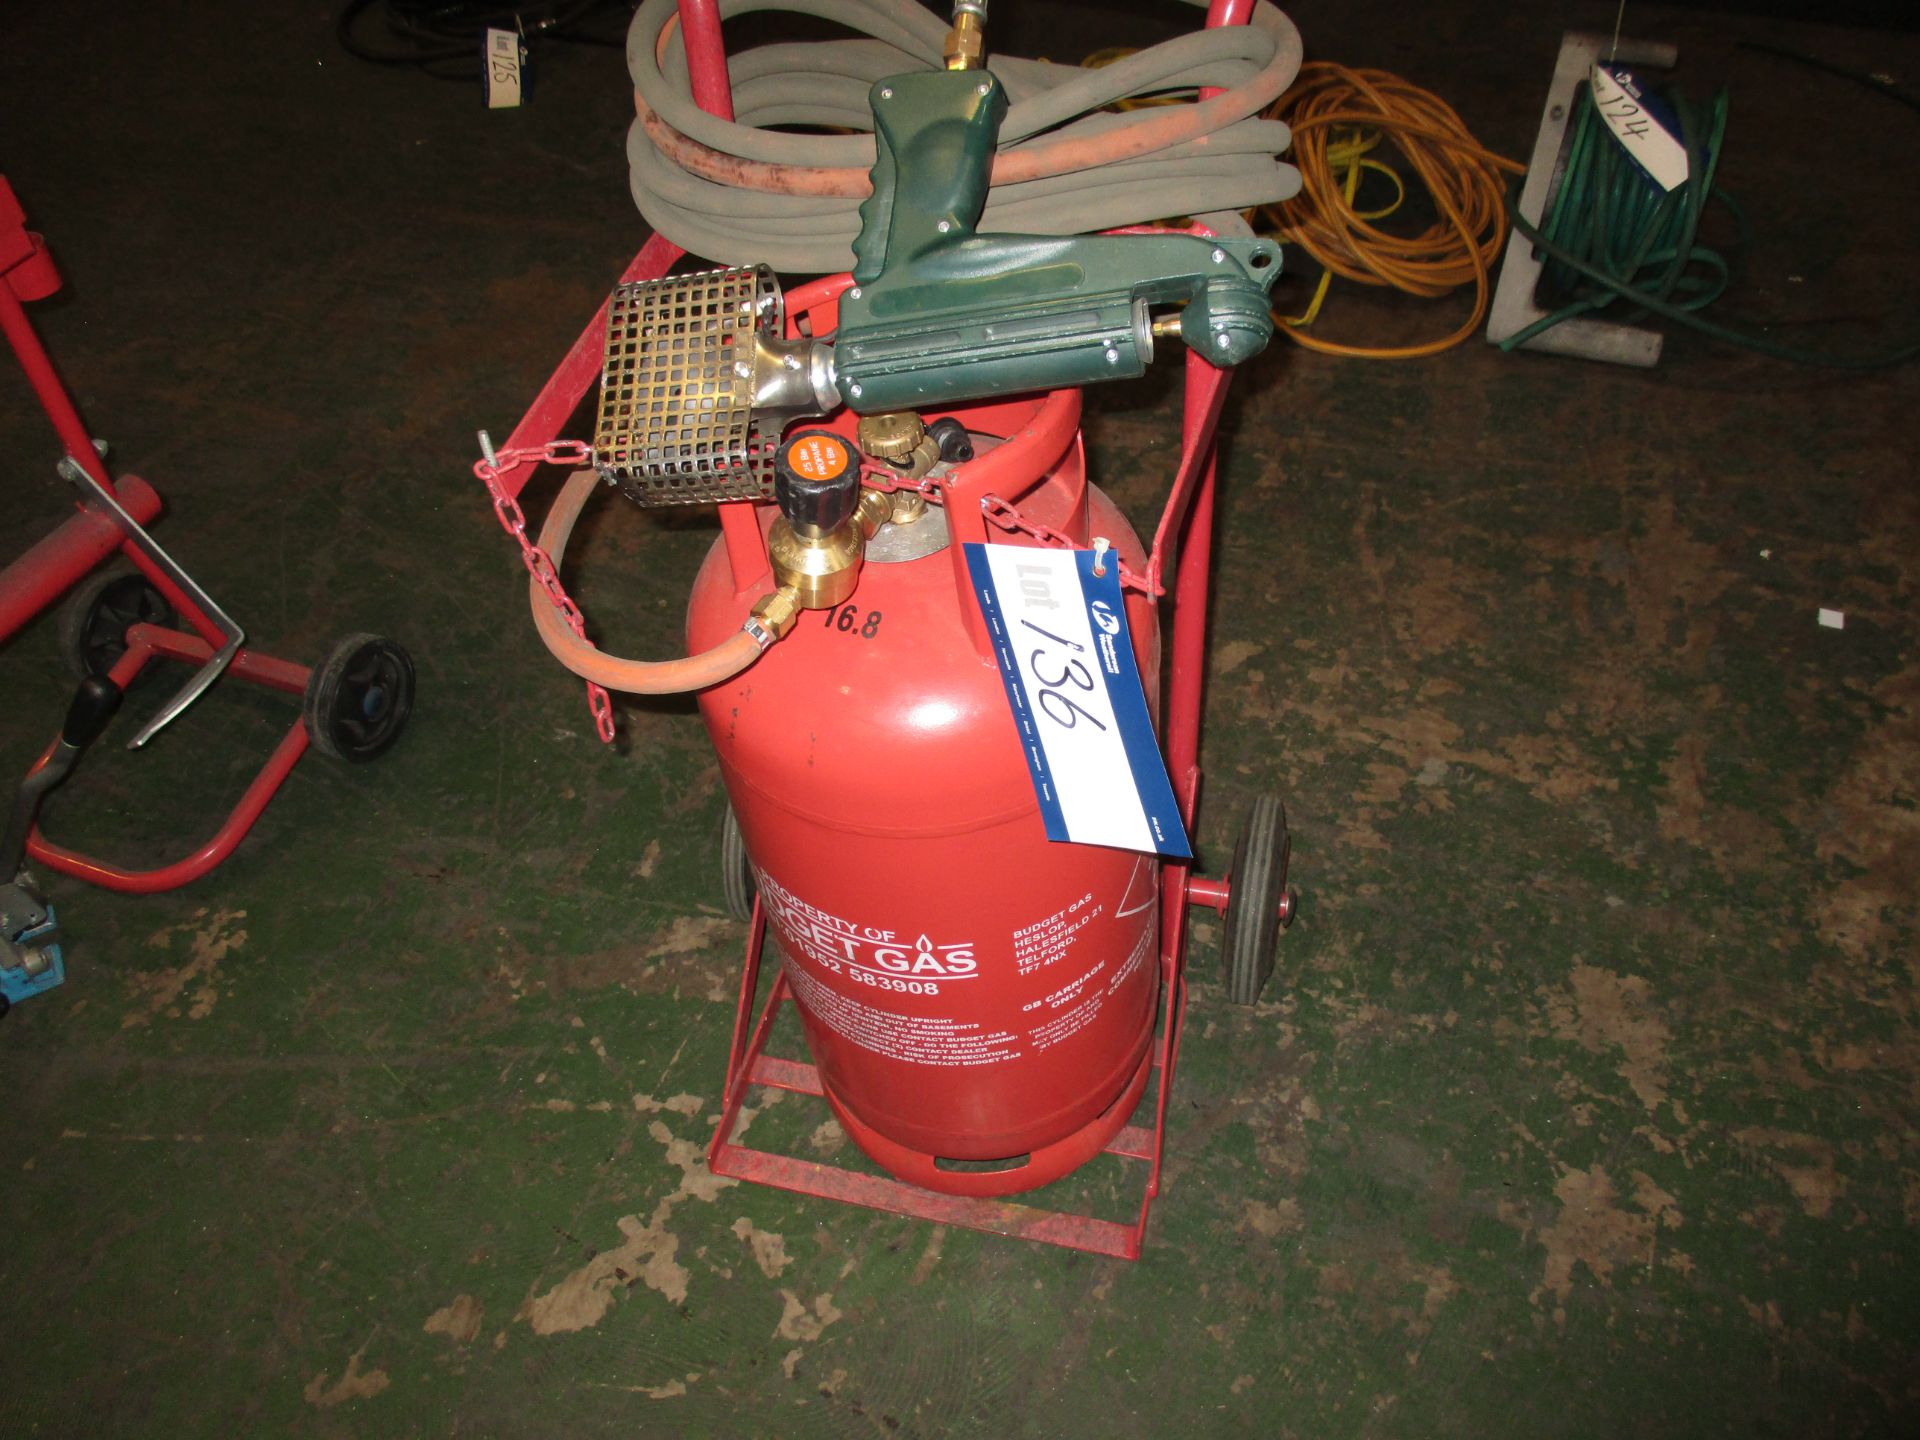 Gas Heat Shrink Gun and trolley (bottle excluded)